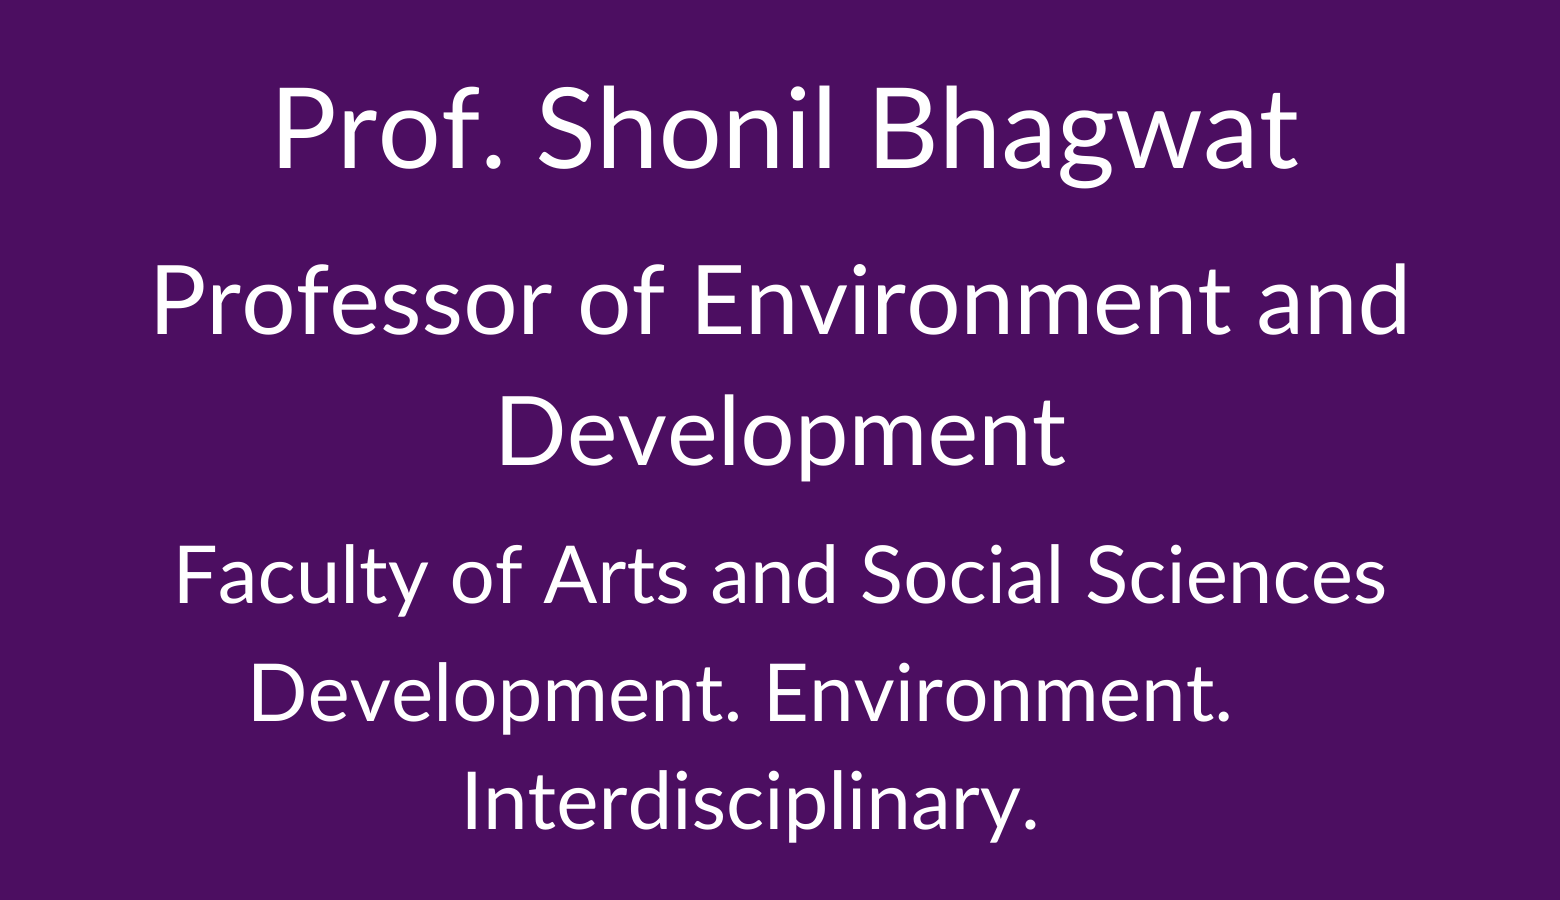 Professor Shonil Bhagwat. Professor of Environment and Development. Faculty of Arts and Social Sciences. Development. Environment. Interdisciplinary.